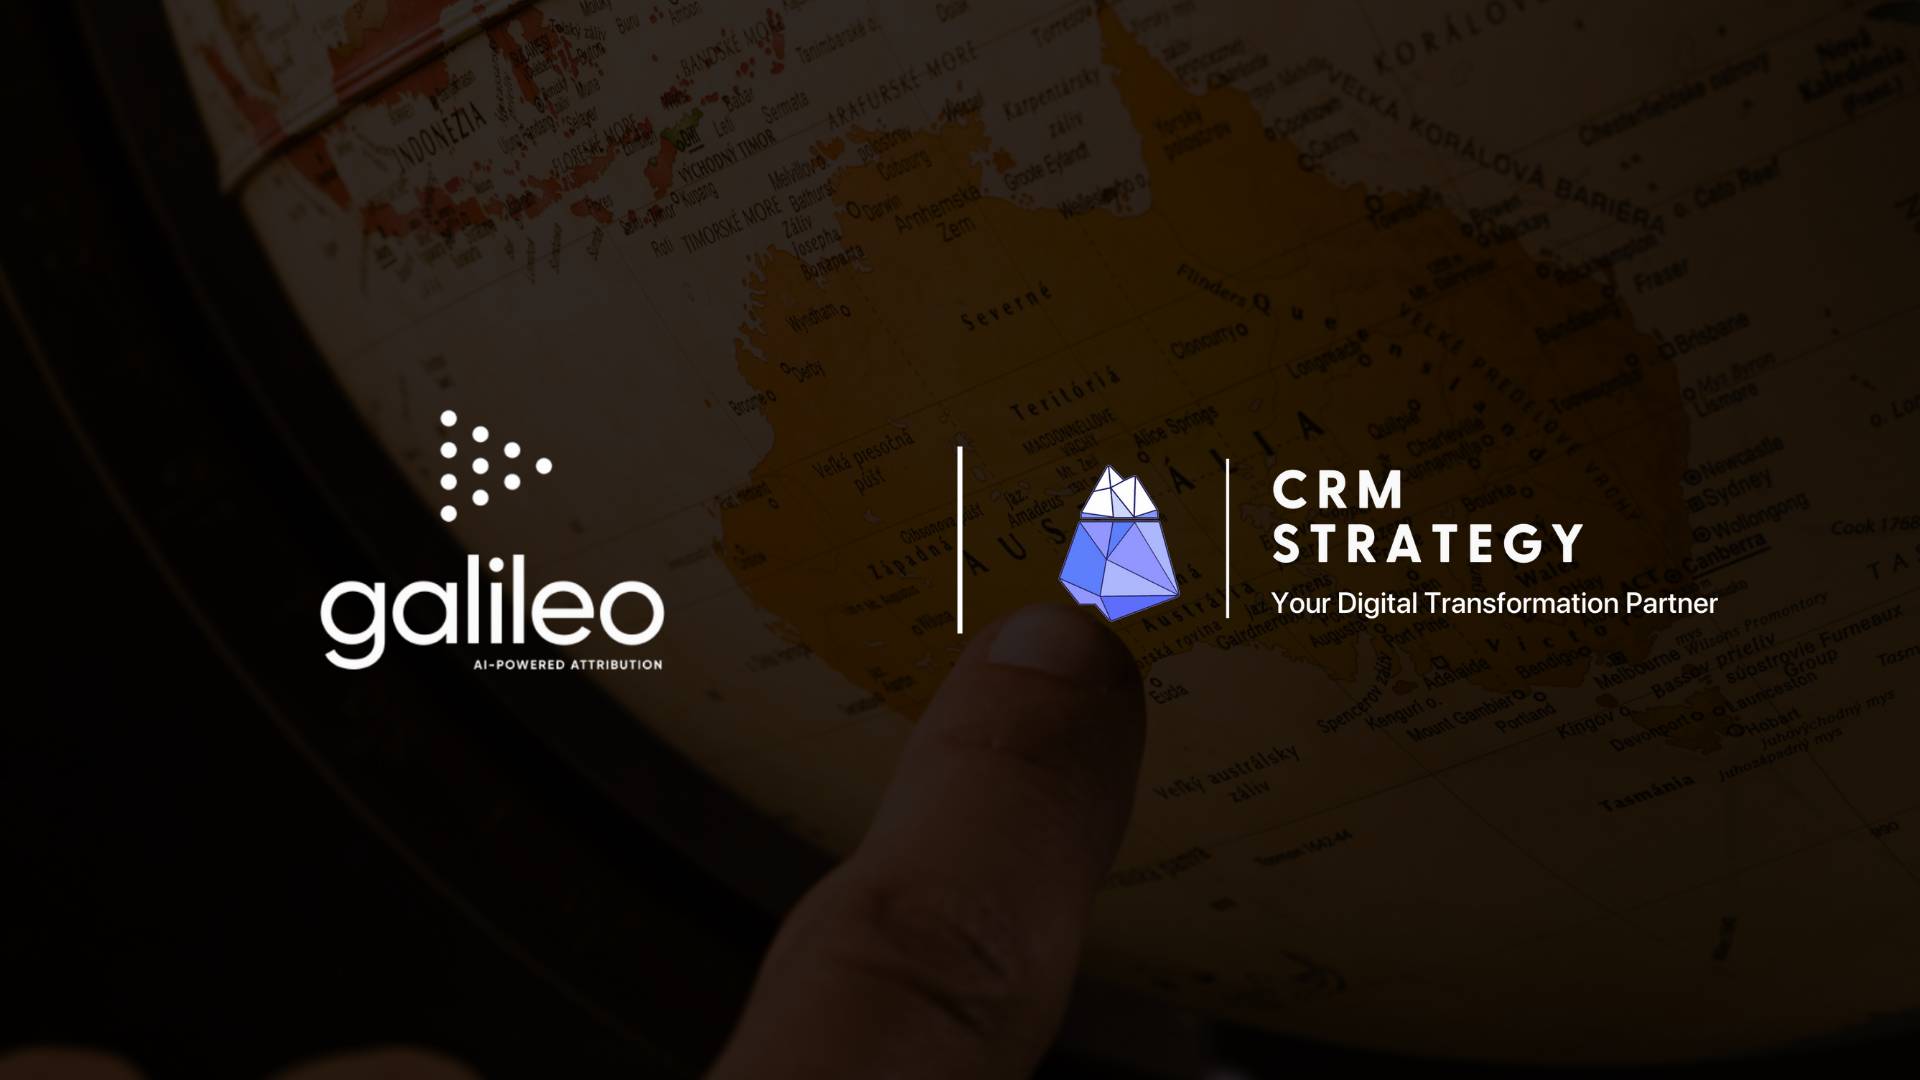 Arcalea Expands into Australia with CRM Strategy: Introducing the Galileo Analytics Platform